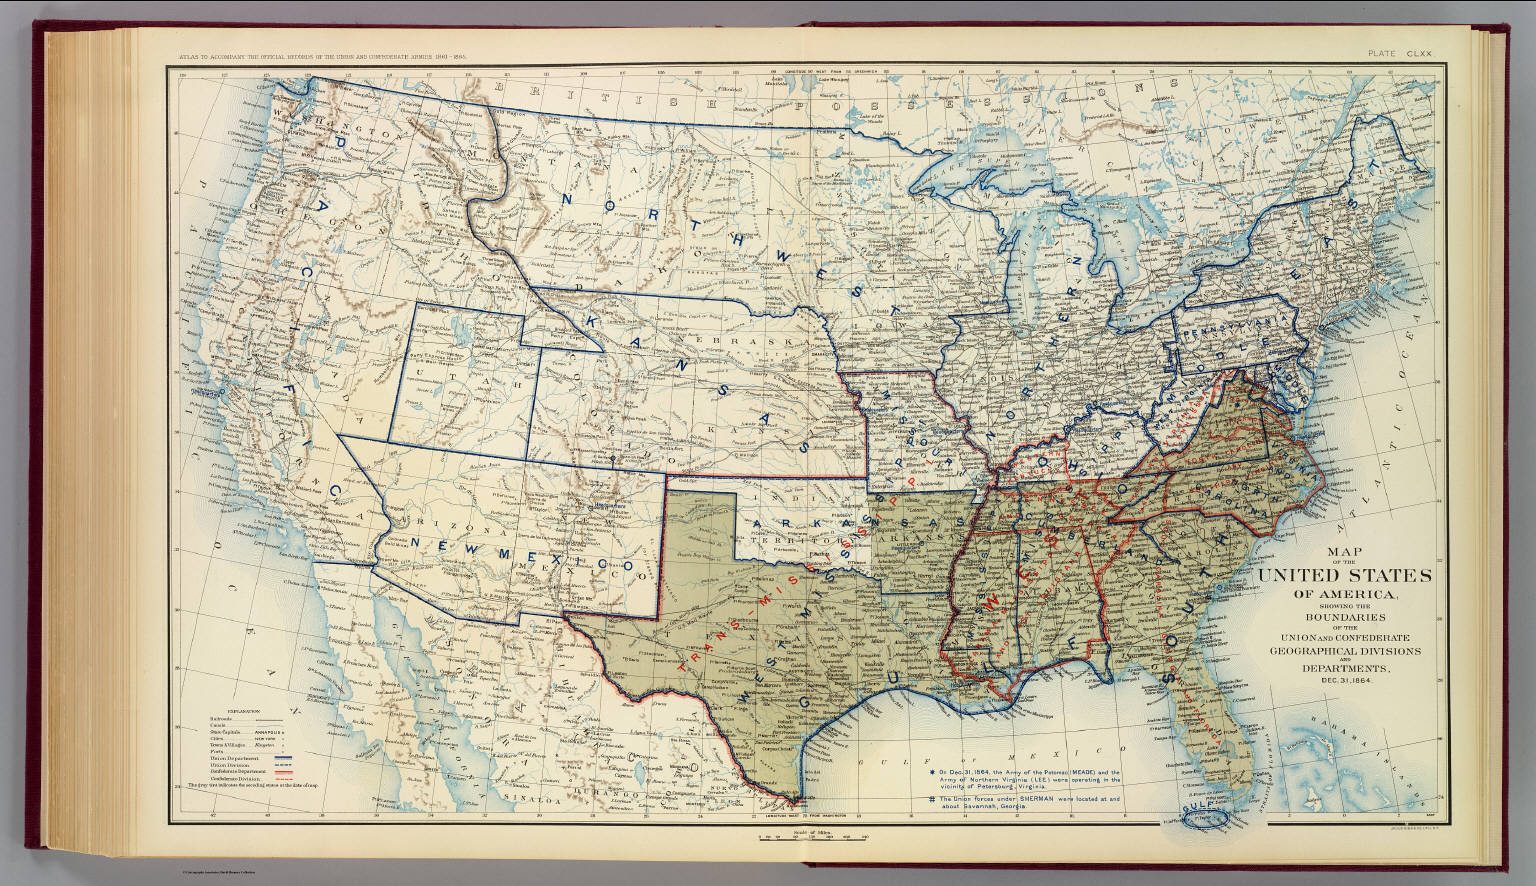 USA Dec. 1864. - David Rumsey Historical Map Collection